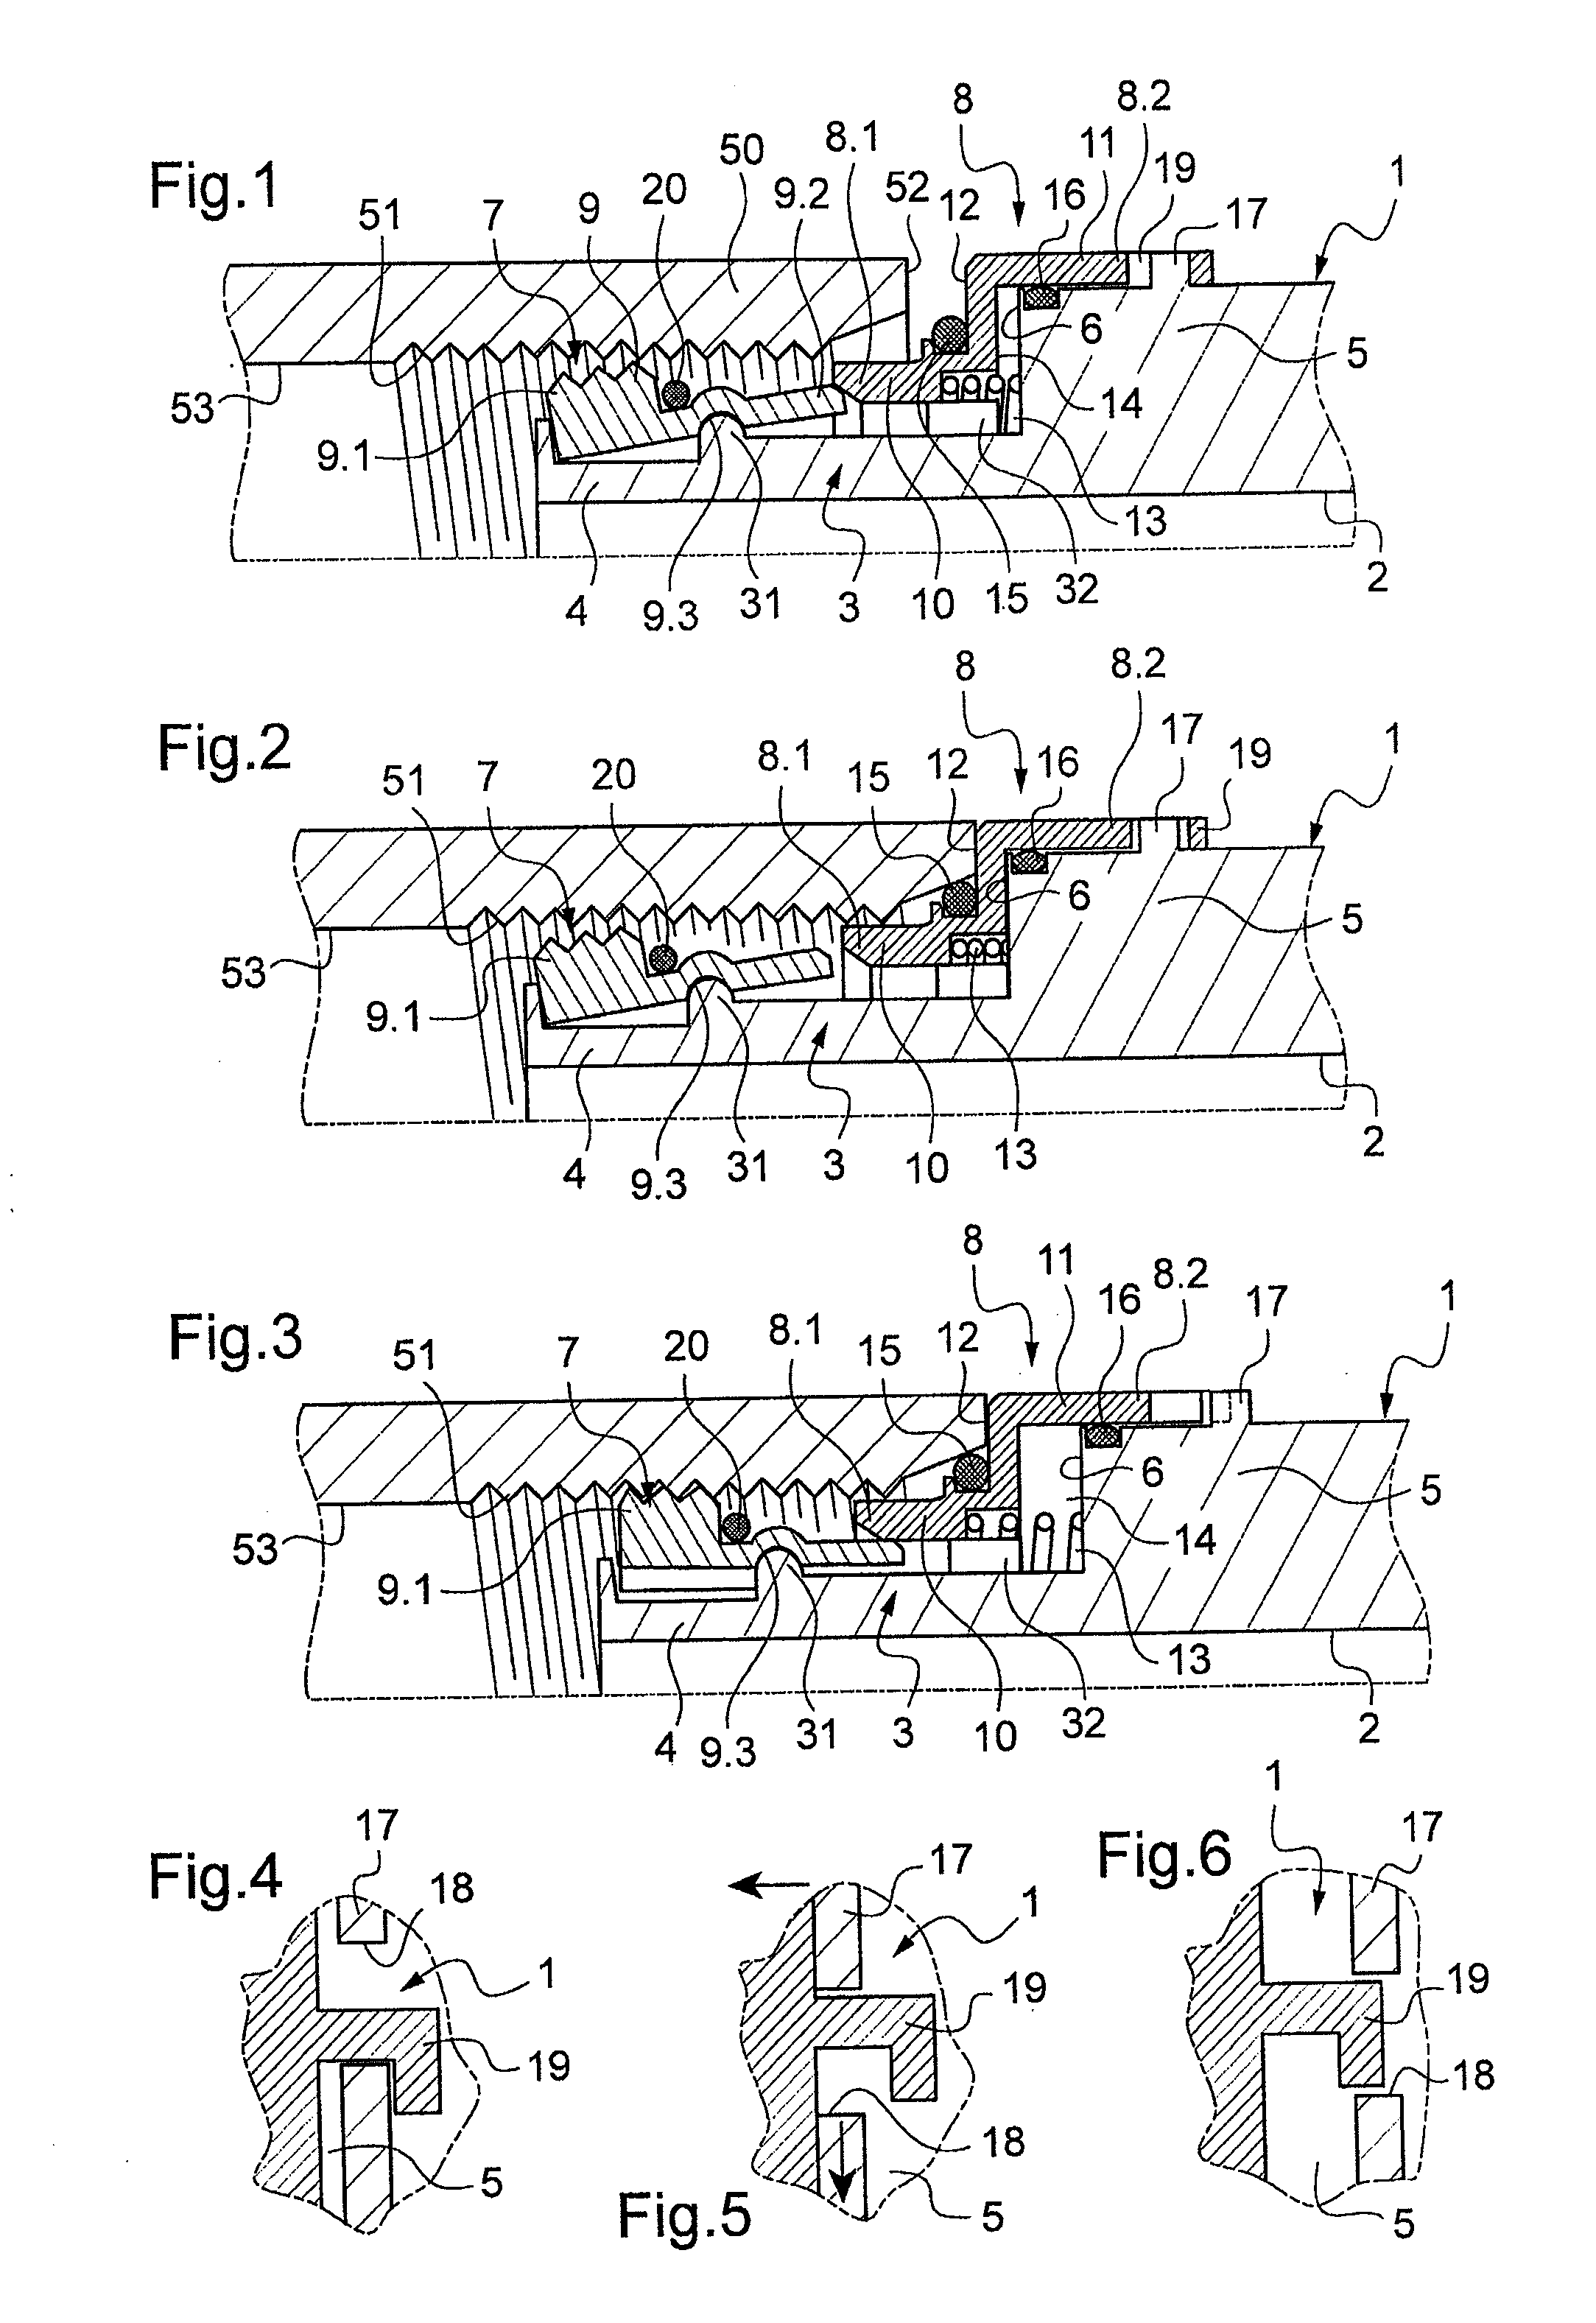 Coupling device fitted with instantaneous or quasi-instantaneous anchor means